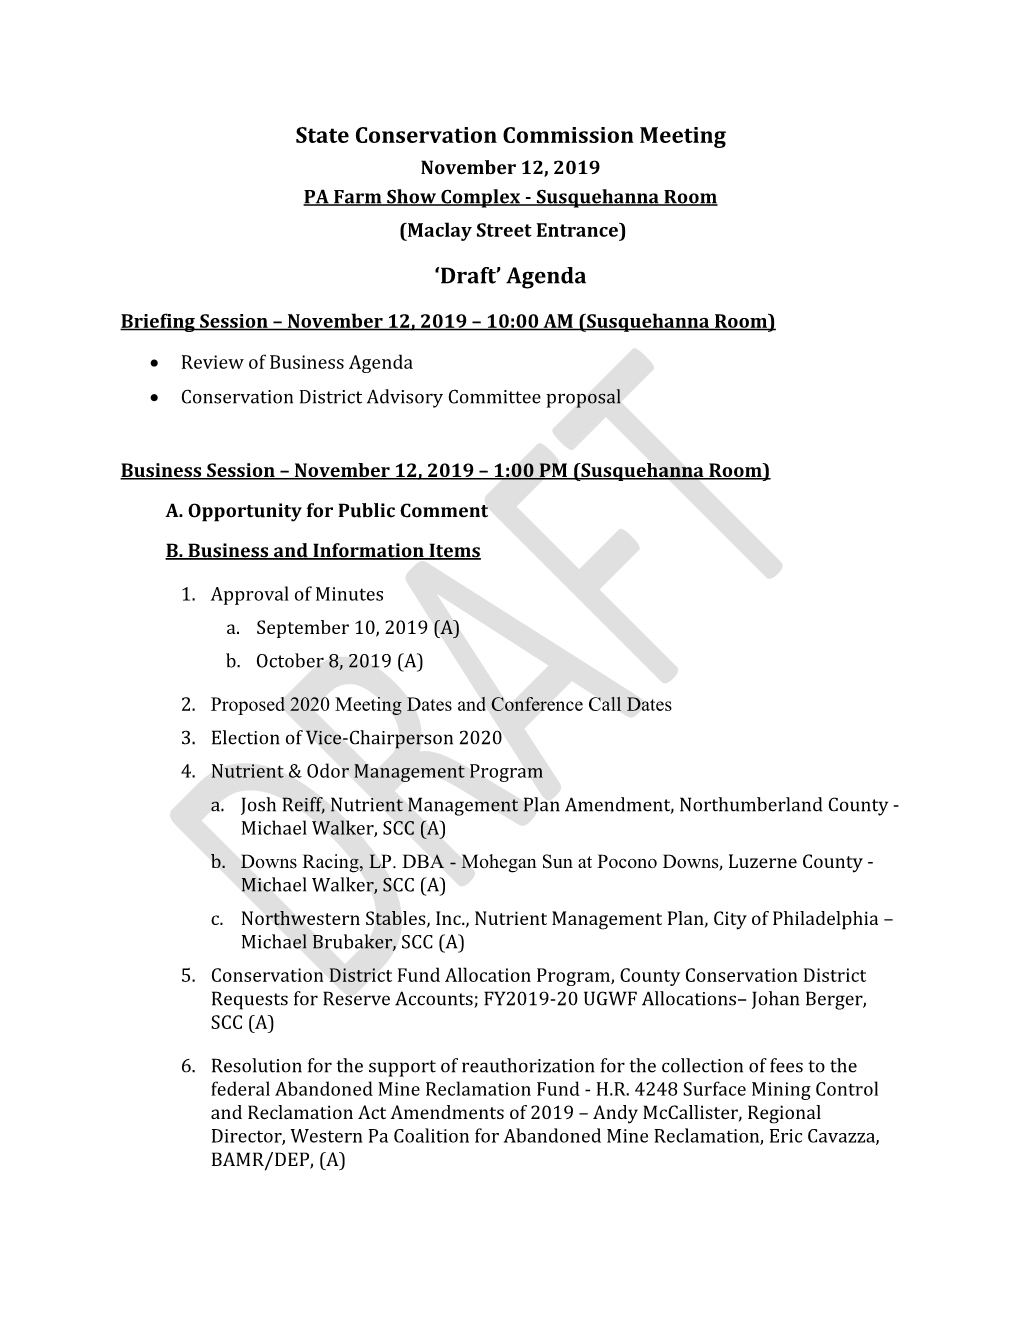 State Conservation Commission Meeting November 12, 2019 PA Farm Show Complex - Susquehanna Room (Maclay Street Entrance)